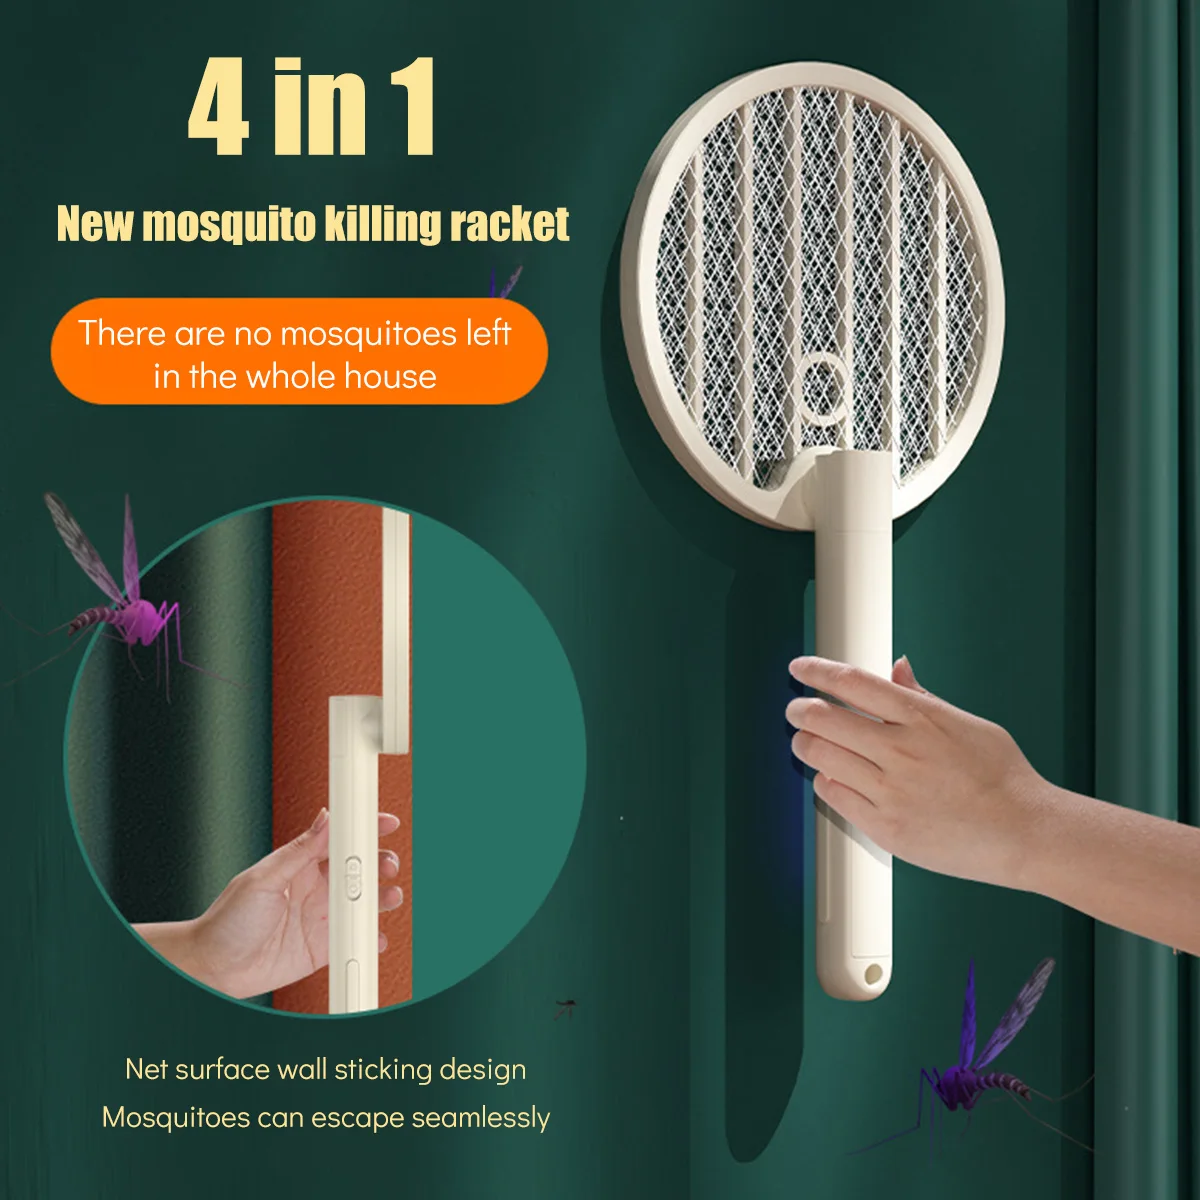 

Electric Mosquito Swatter Bug Zapper Racket 2 in 1 Insects 3000V Mosquito Killer Lamp USB Rechargeable Fly Swatter Foldable bat